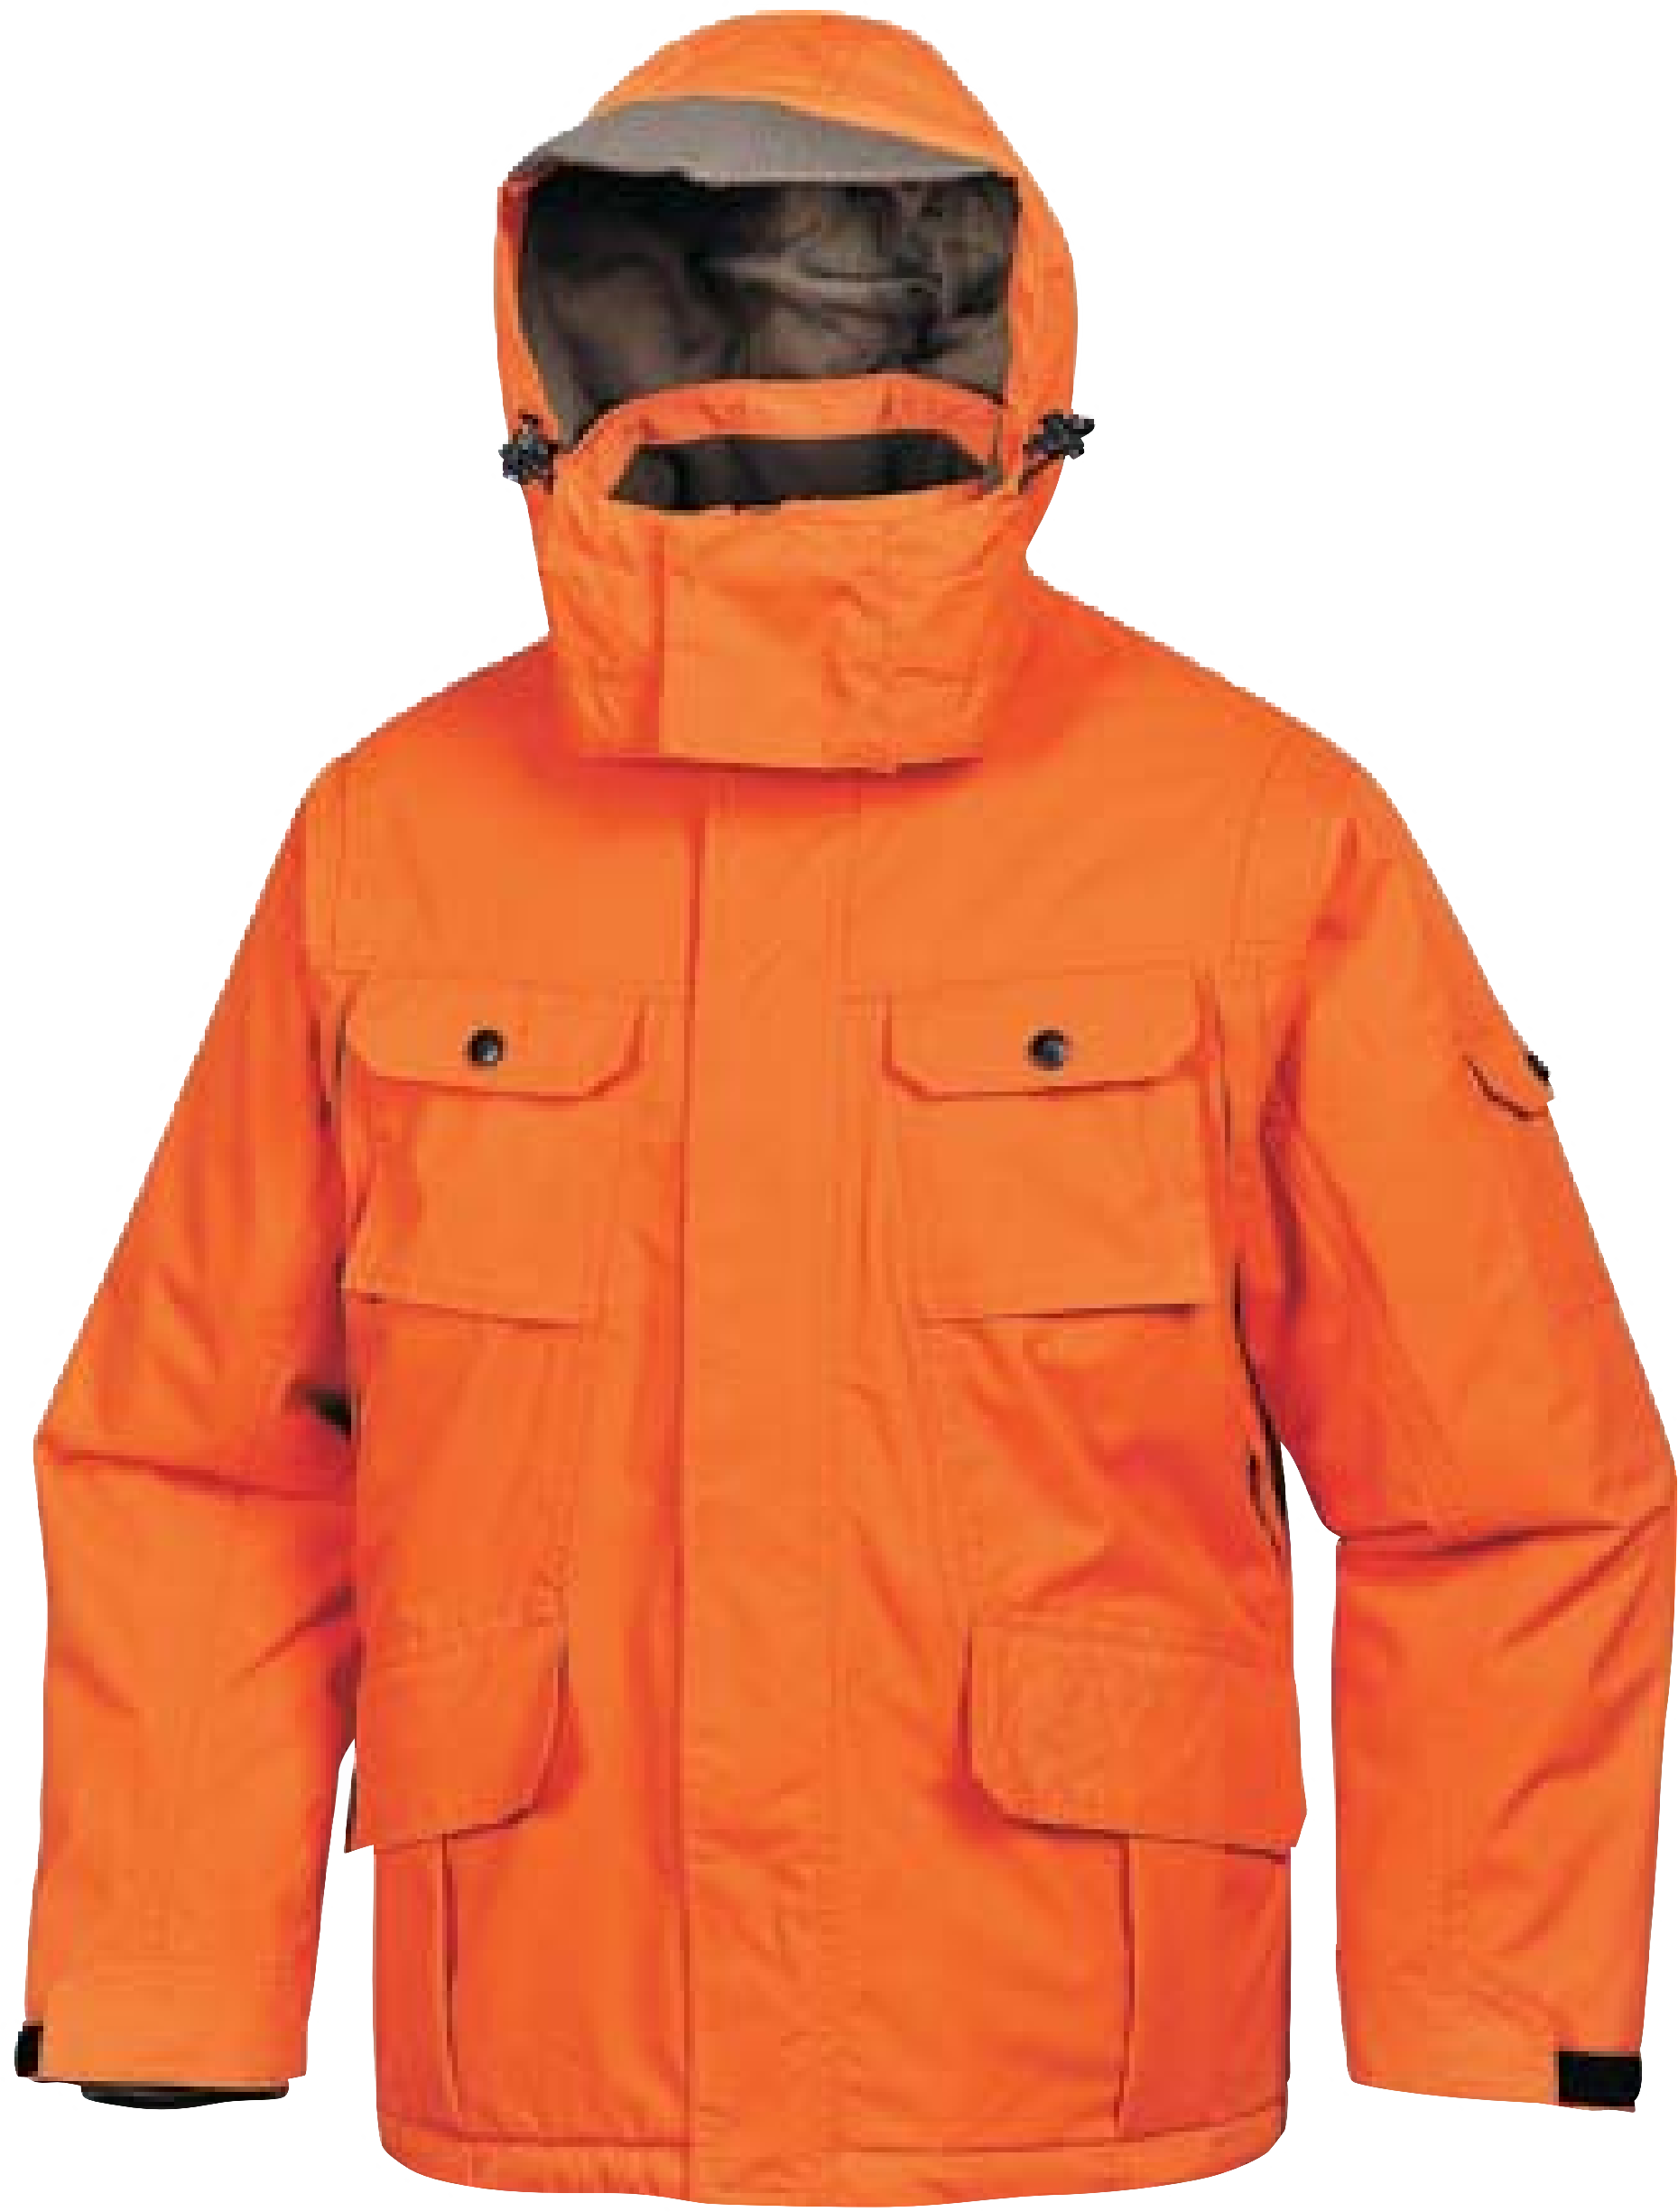 Outdoor Clothing – Leading S.P.R.L.